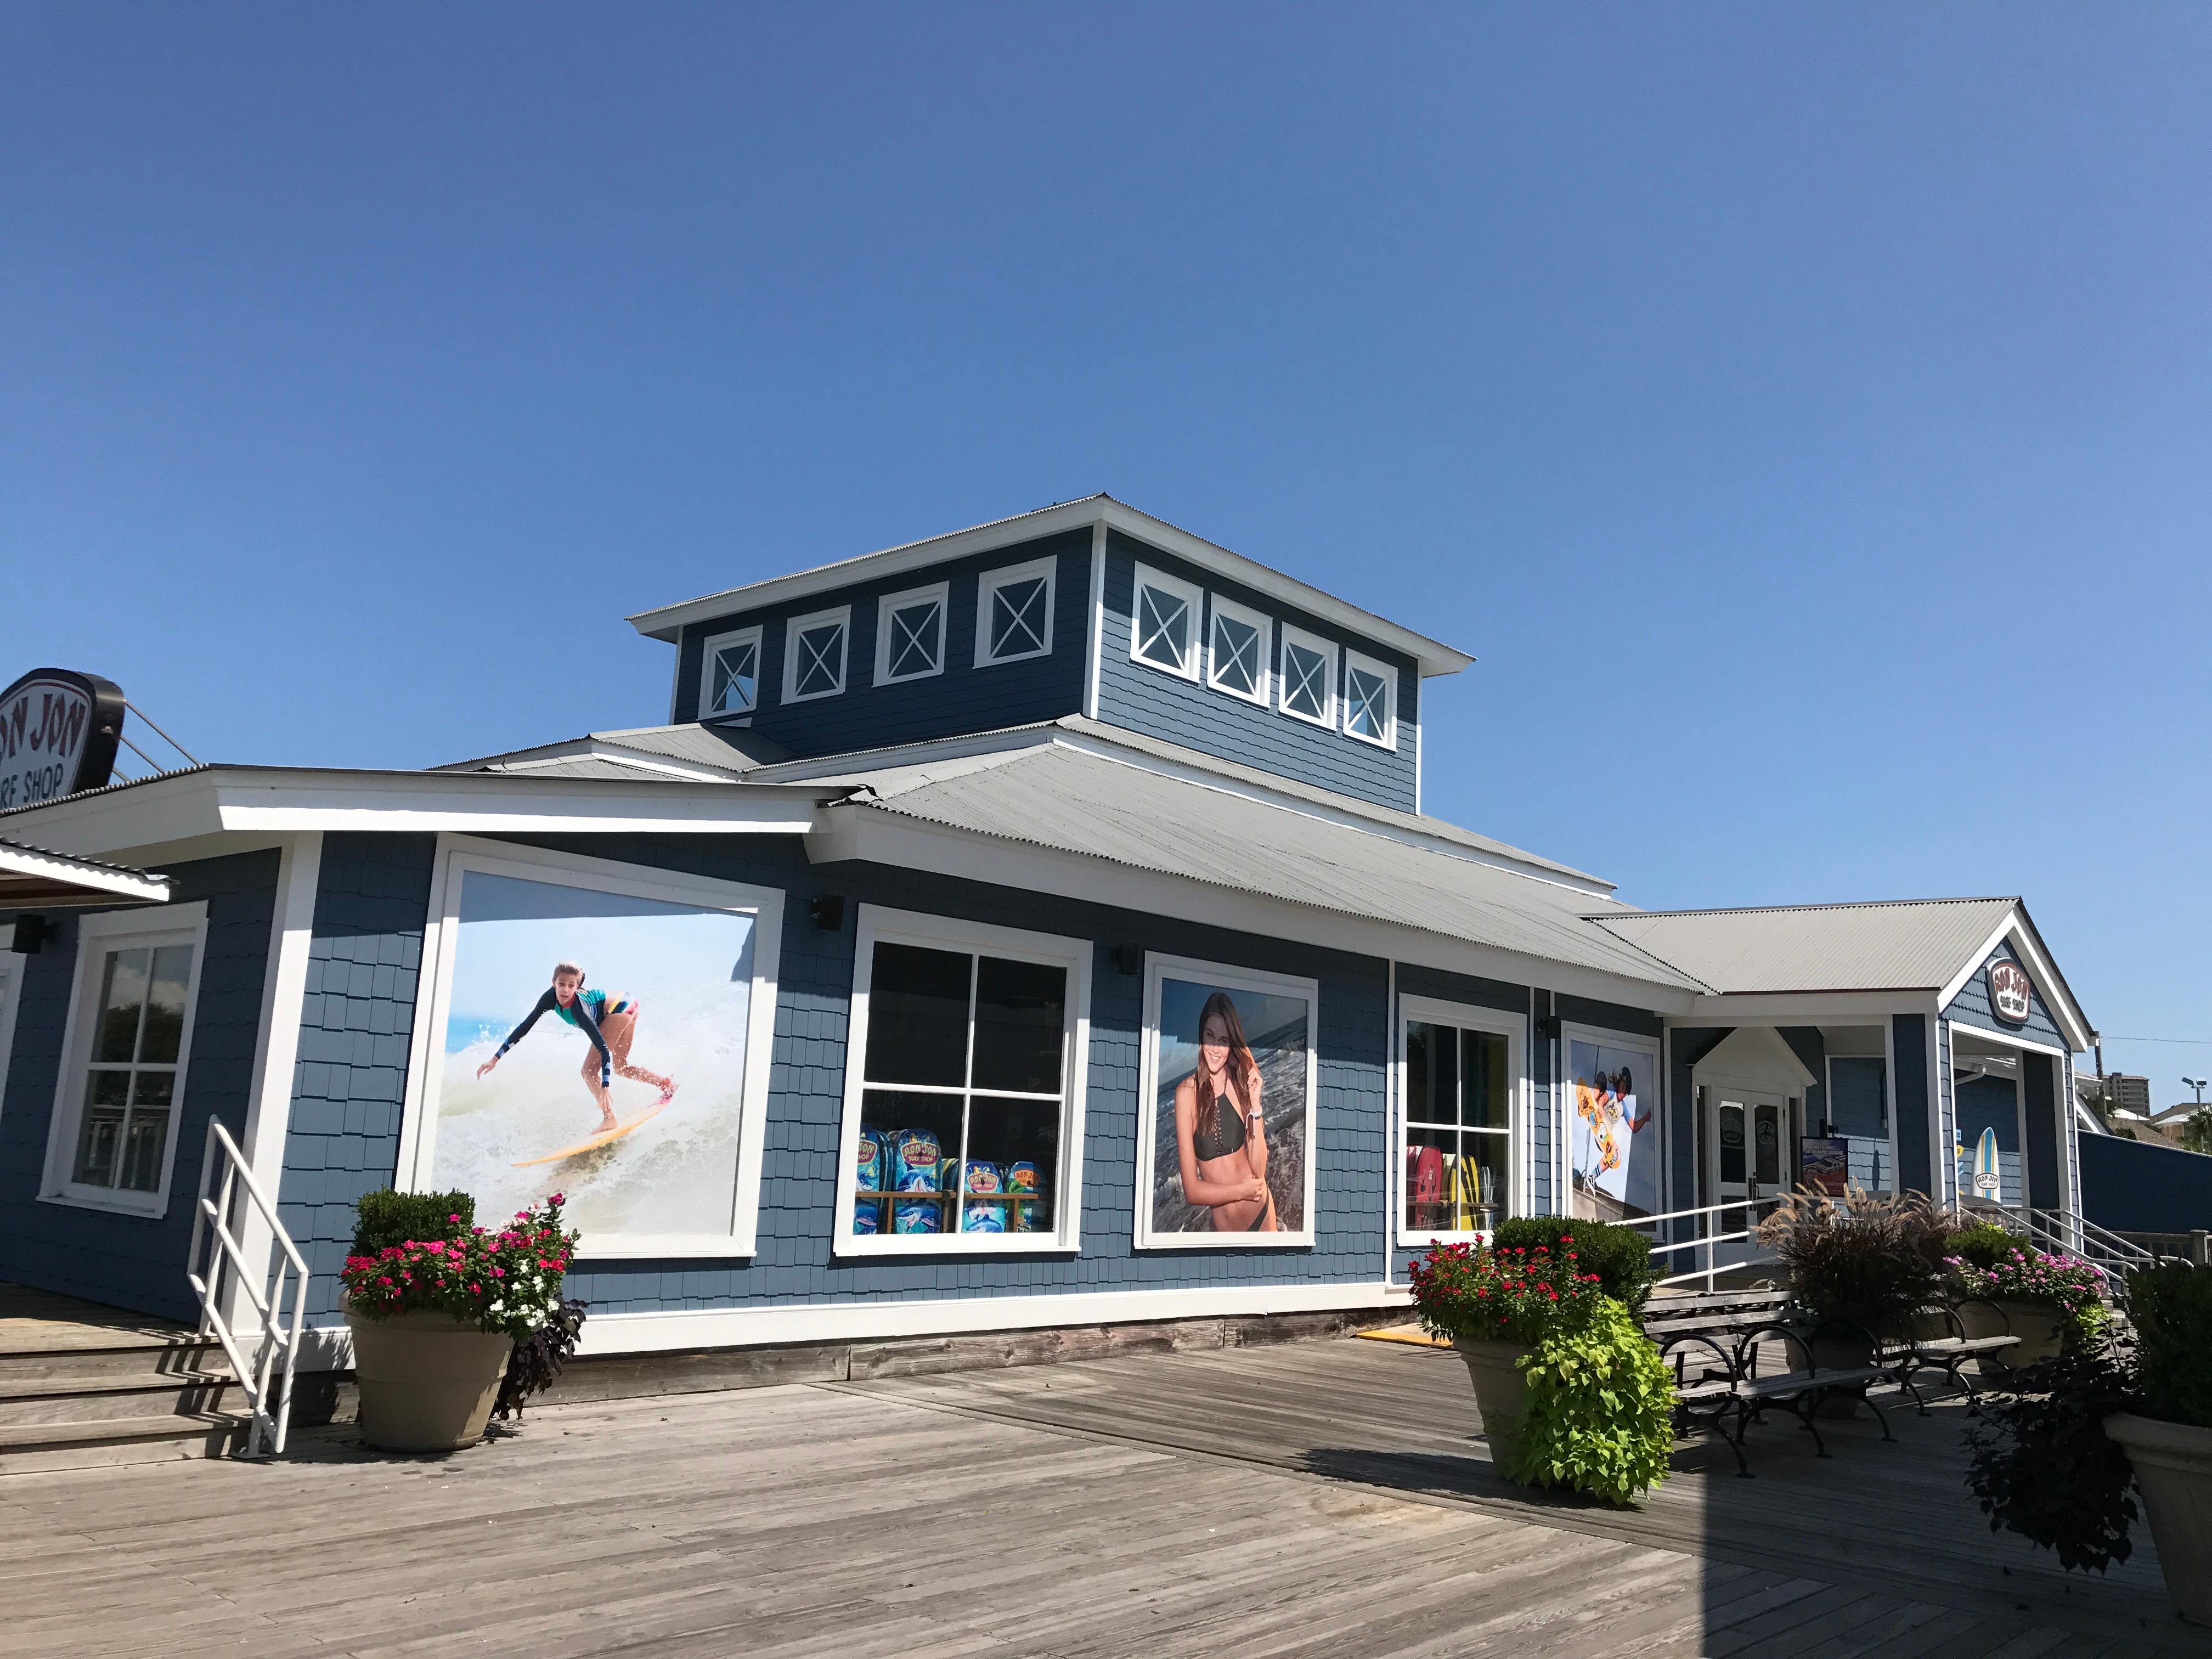 Get directions, reviews and information for Ron Jon Surf Shop - Barefoot La...